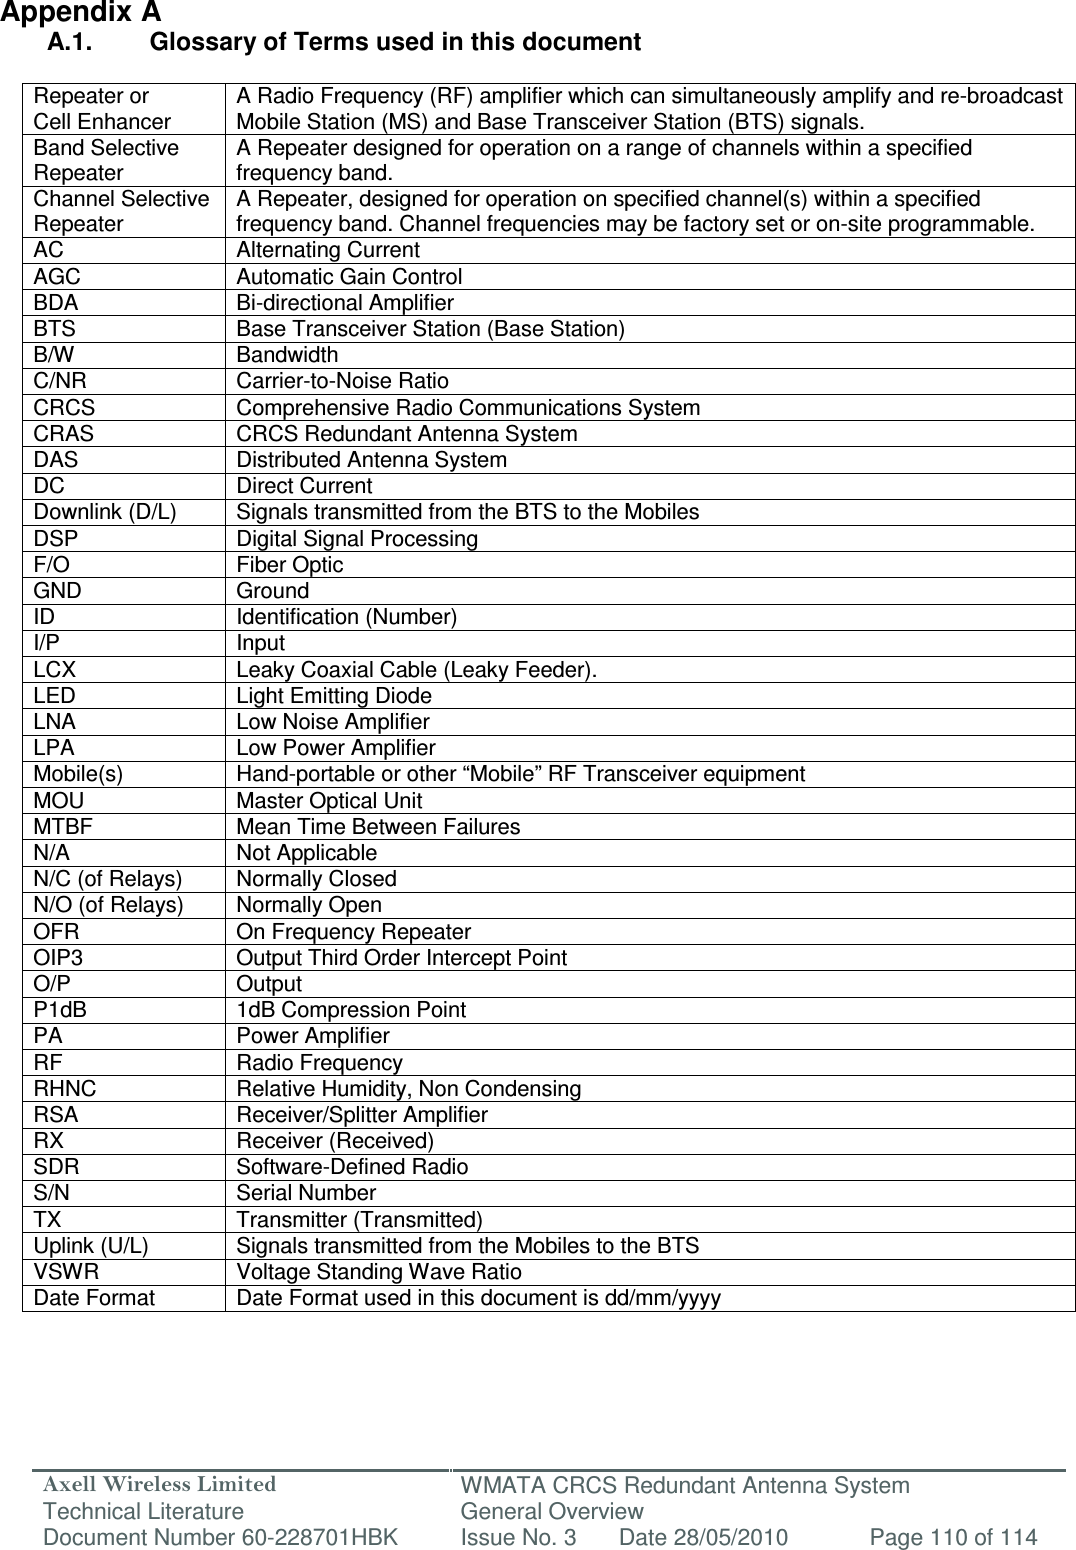 Axell Wireless Limited Technical Literature WMATA CRCS Redundant Antenna System General Overview Document Number 60-228701HBK  Issue No. 3  Date 28/05/2010  Page 110 of 114   Appendix A A.1.  Glossary of Terms used in this document  Repeater or Cell Enhancer A Radio Frequency (RF) amplifier which can simultaneously amplify and re-broadcast Mobile Station (MS) and Base Transceiver Station (BTS) signals. Band Selective  Repeater A Repeater designed for operation on a range of channels within a specified frequency band. Channel Selective Repeater A Repeater, designed for operation on specified channel(s) within a specified frequency band. Channel frequencies may be factory set or on-site programmable. AC  Alternating Current AGC  Automatic Gain Control BDA  Bi-directional Amplifier BTS  Base Transceiver Station (Base Station) B/W  Bandwidth C/NR  Carrier-to-Noise Ratio CRCS  Comprehensive Radio Communications System CRAS  CRCS Redundant Antenna System DAS  Distributed Antenna System DC  Direct Current Downlink (D/L)  Signals transmitted from the BTS to the Mobiles DSP  Digital Signal Processing F/O  Fiber Optic GND  Ground ID  Identification (Number) I/P  Input LCX  Leaky Coaxial Cable (Leaky Feeder). LED  Light Emitting Diode LNA  Low Noise Amplifier LPA  Low Power Amplifier Mobile(s)  Hand-portable or other “Mobile” RF Transceiver equipment MOU  Master Optical Unit MTBF  Mean Time Between Failures N/A  Not Applicable N/C (of Relays)  Normally Closed N/O (of Relays)  Normally Open OFR  On Frequency Repeater OIP3  Output Third Order Intercept Point O/P  Output P1dB  1dB Compression Point PA  Power Amplifier RF  Radio Frequency RHNC  Relative Humidity, Non Condensing RSA  Receiver/Splitter Amplifier RX  Receiver (Received) SDR  Software-Defined Radio S/N  Serial Number TX  Transmitter (Transmitted) Uplink (U/L)  Signals transmitted from the Mobiles to the BTS VSWR  Voltage Standing Wave Ratio Date Format  Date Format used in this document is dd/mm/yyyy   